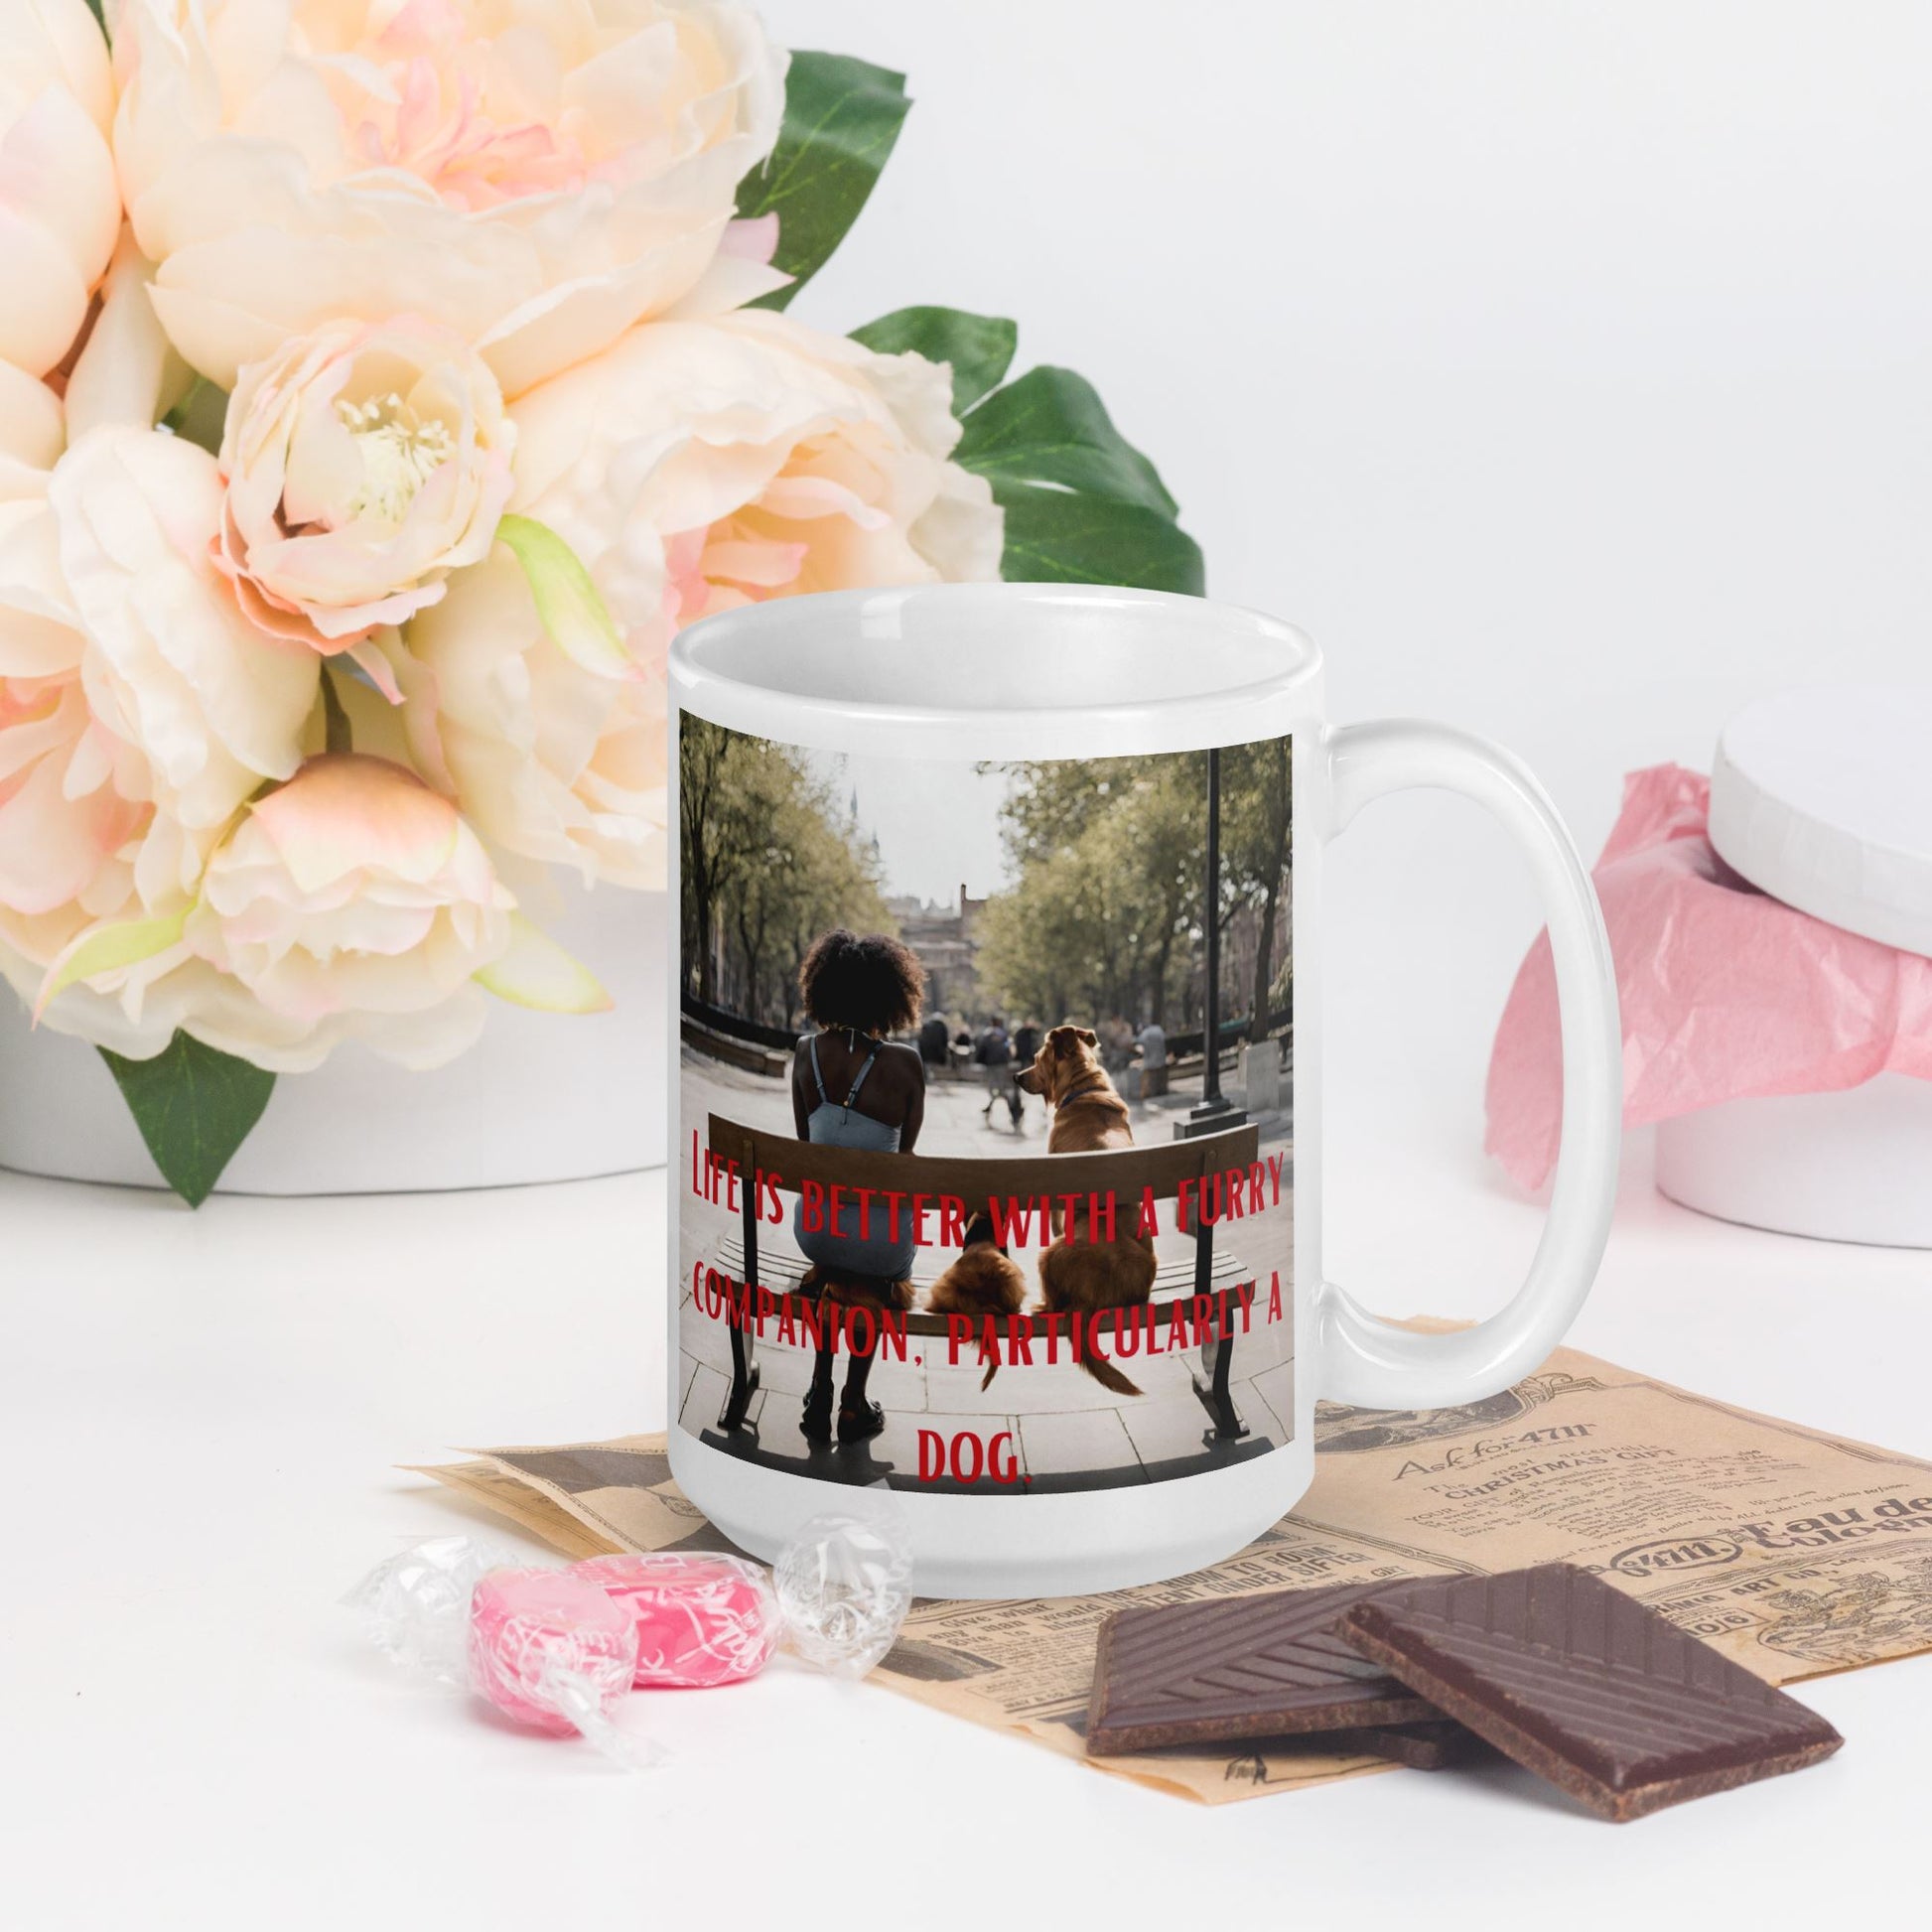 Whether you're drinking your morning coffee, evening tea, or something in between—this mug's for you! It's sturdy and glossy with a vivid print that'll withstand the microwave and dishwasher.